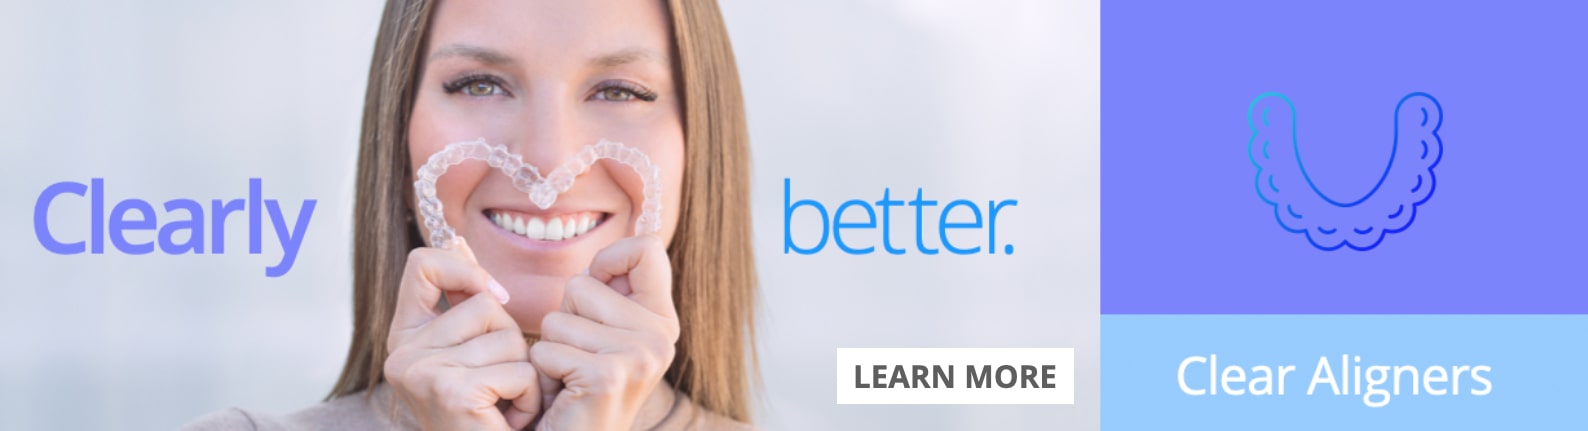 learn more about clear aligners